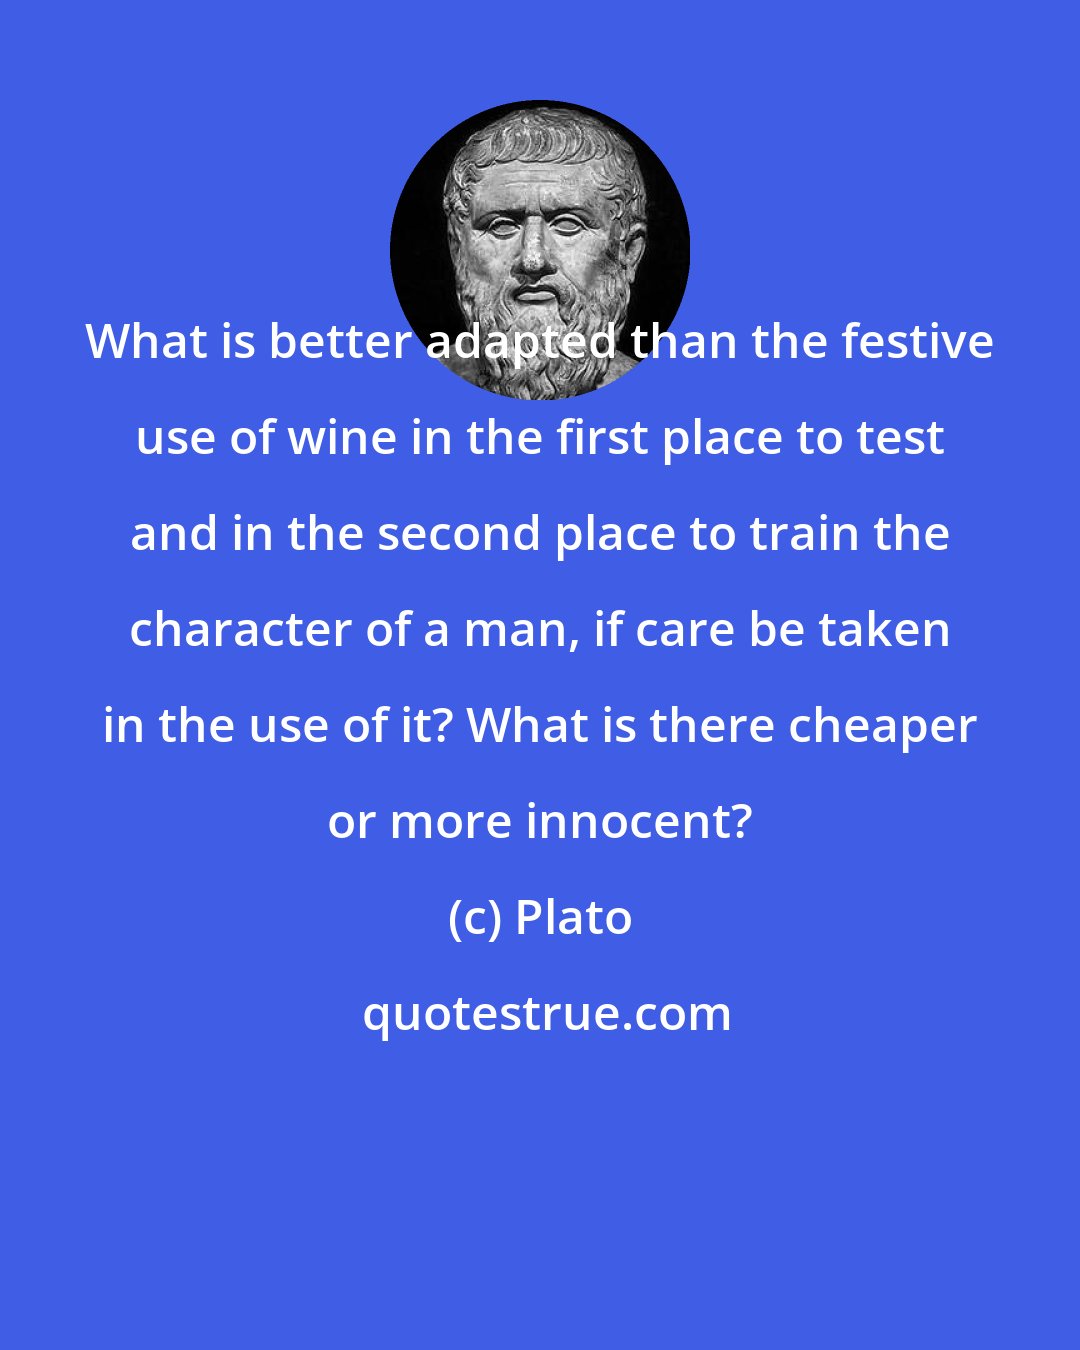 Plato: What is better adapted than the festive use of wine in the first place to test and in the second place to train the character of a man, if care be taken in the use of it? What is there cheaper or more innocent?